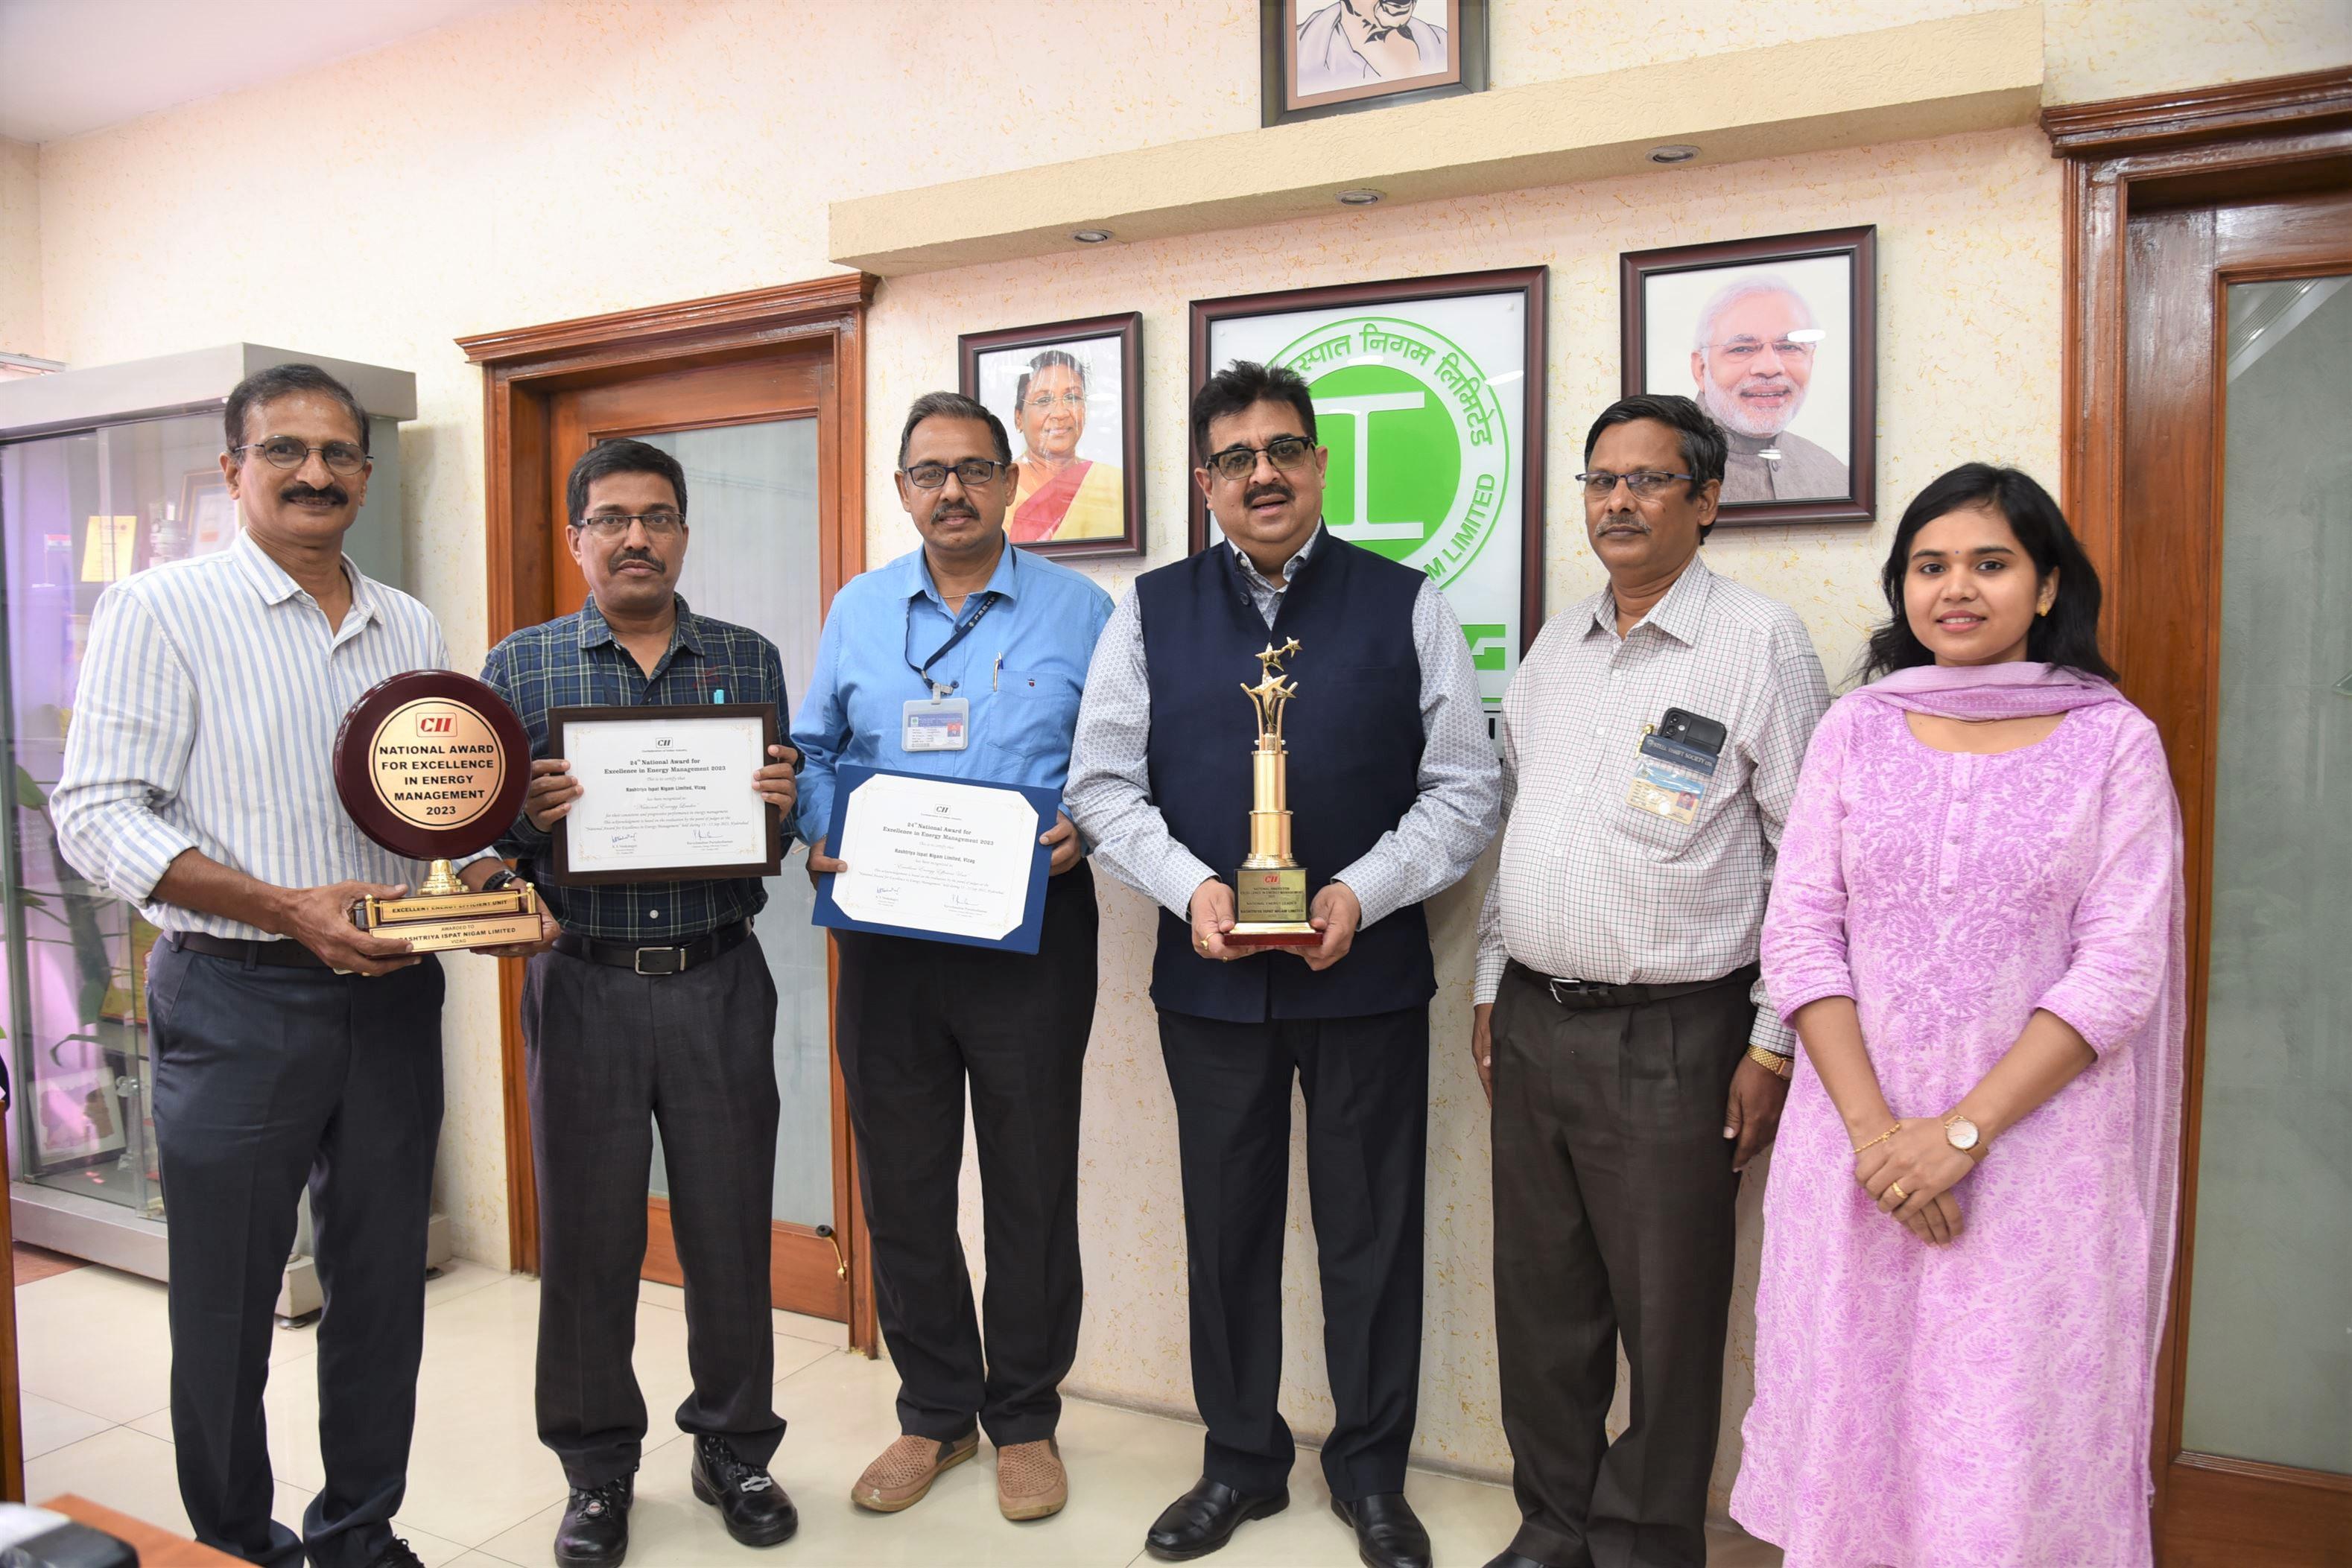 RINL ACHIEVES UNPRECEDENTED MILESTONE  BAGS the Prestigious National Energy Leader award for the 5th time in a row A remarkable feat in any industry.